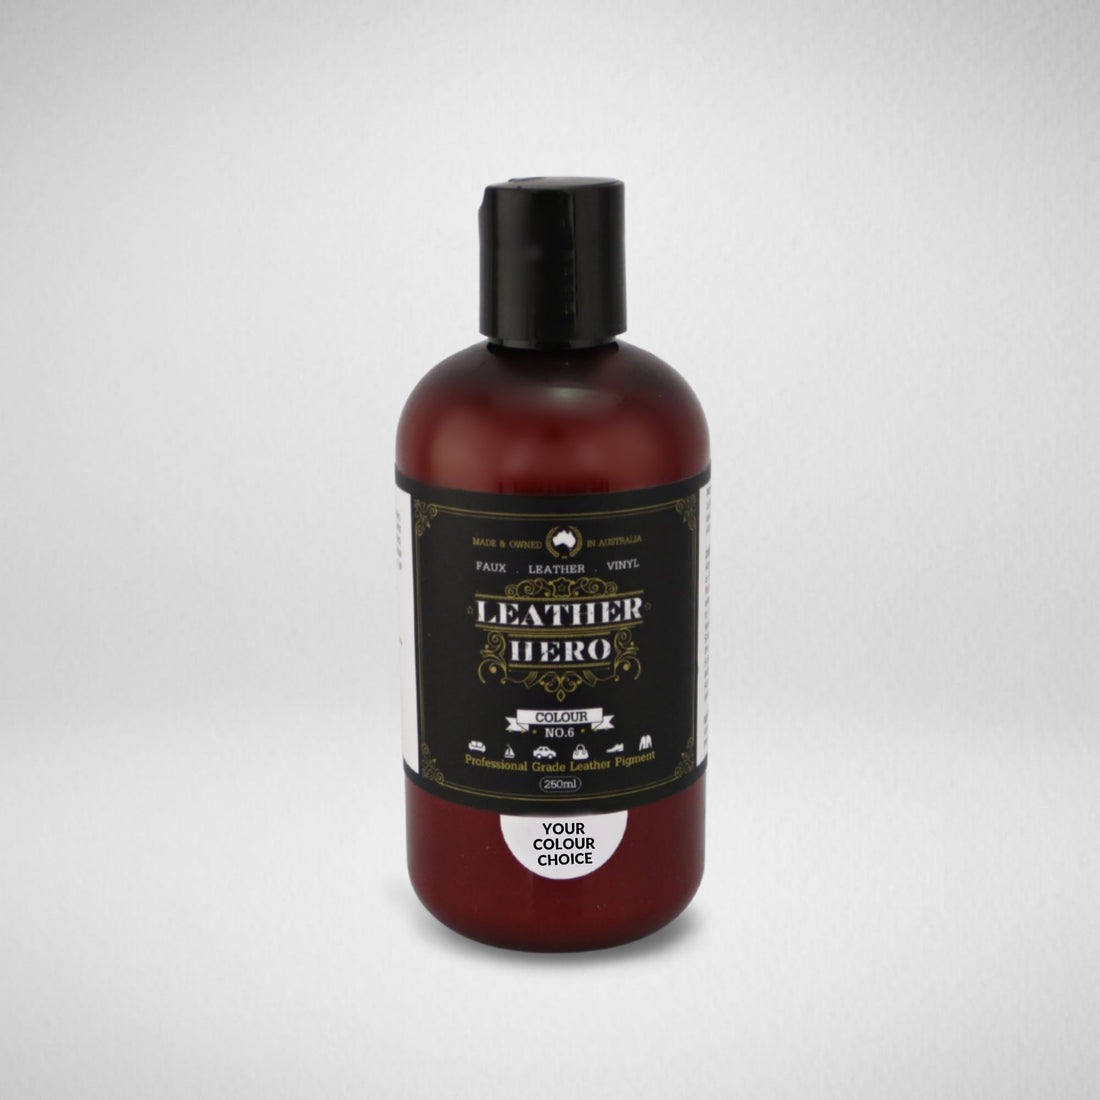 Leather Paint - Caramel Leather Repair & Recolouring Leather Hero Australia